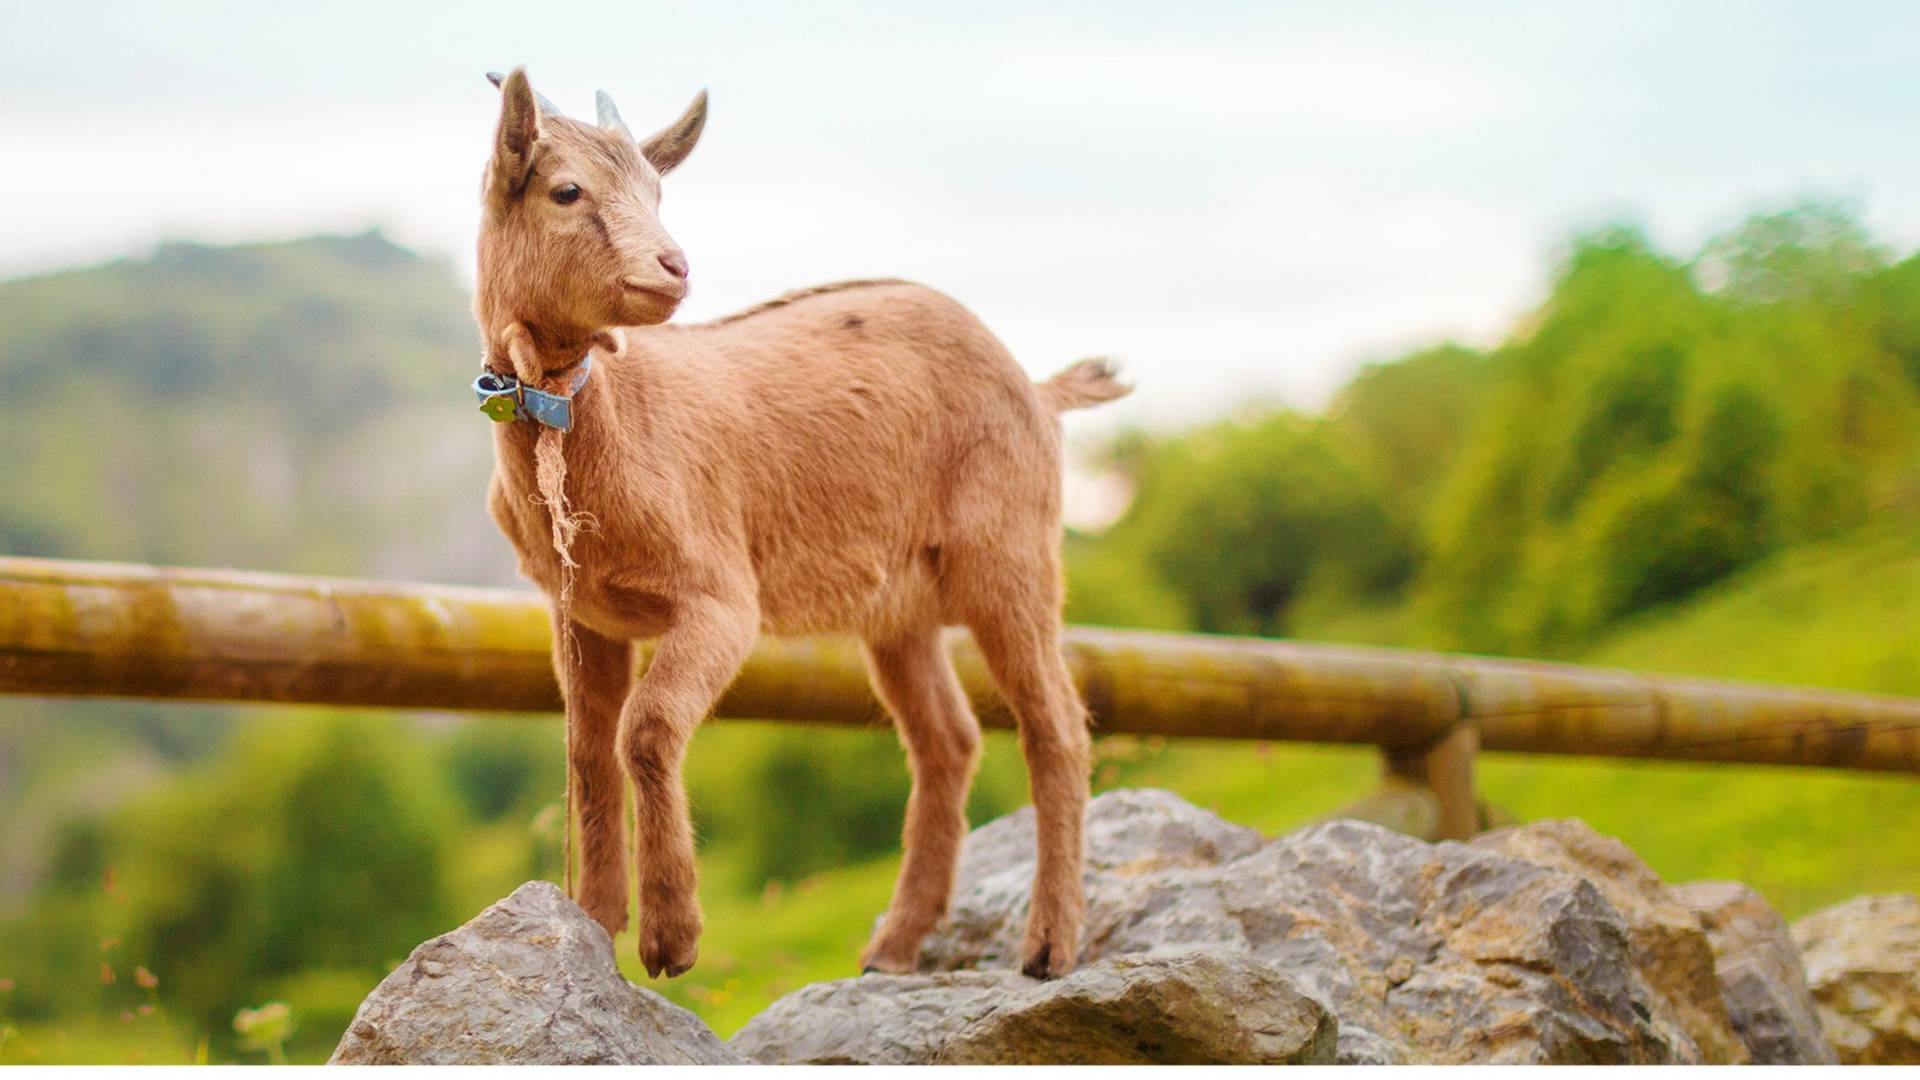 Baby Goat With Leash Stands On A Rock Wallpaper